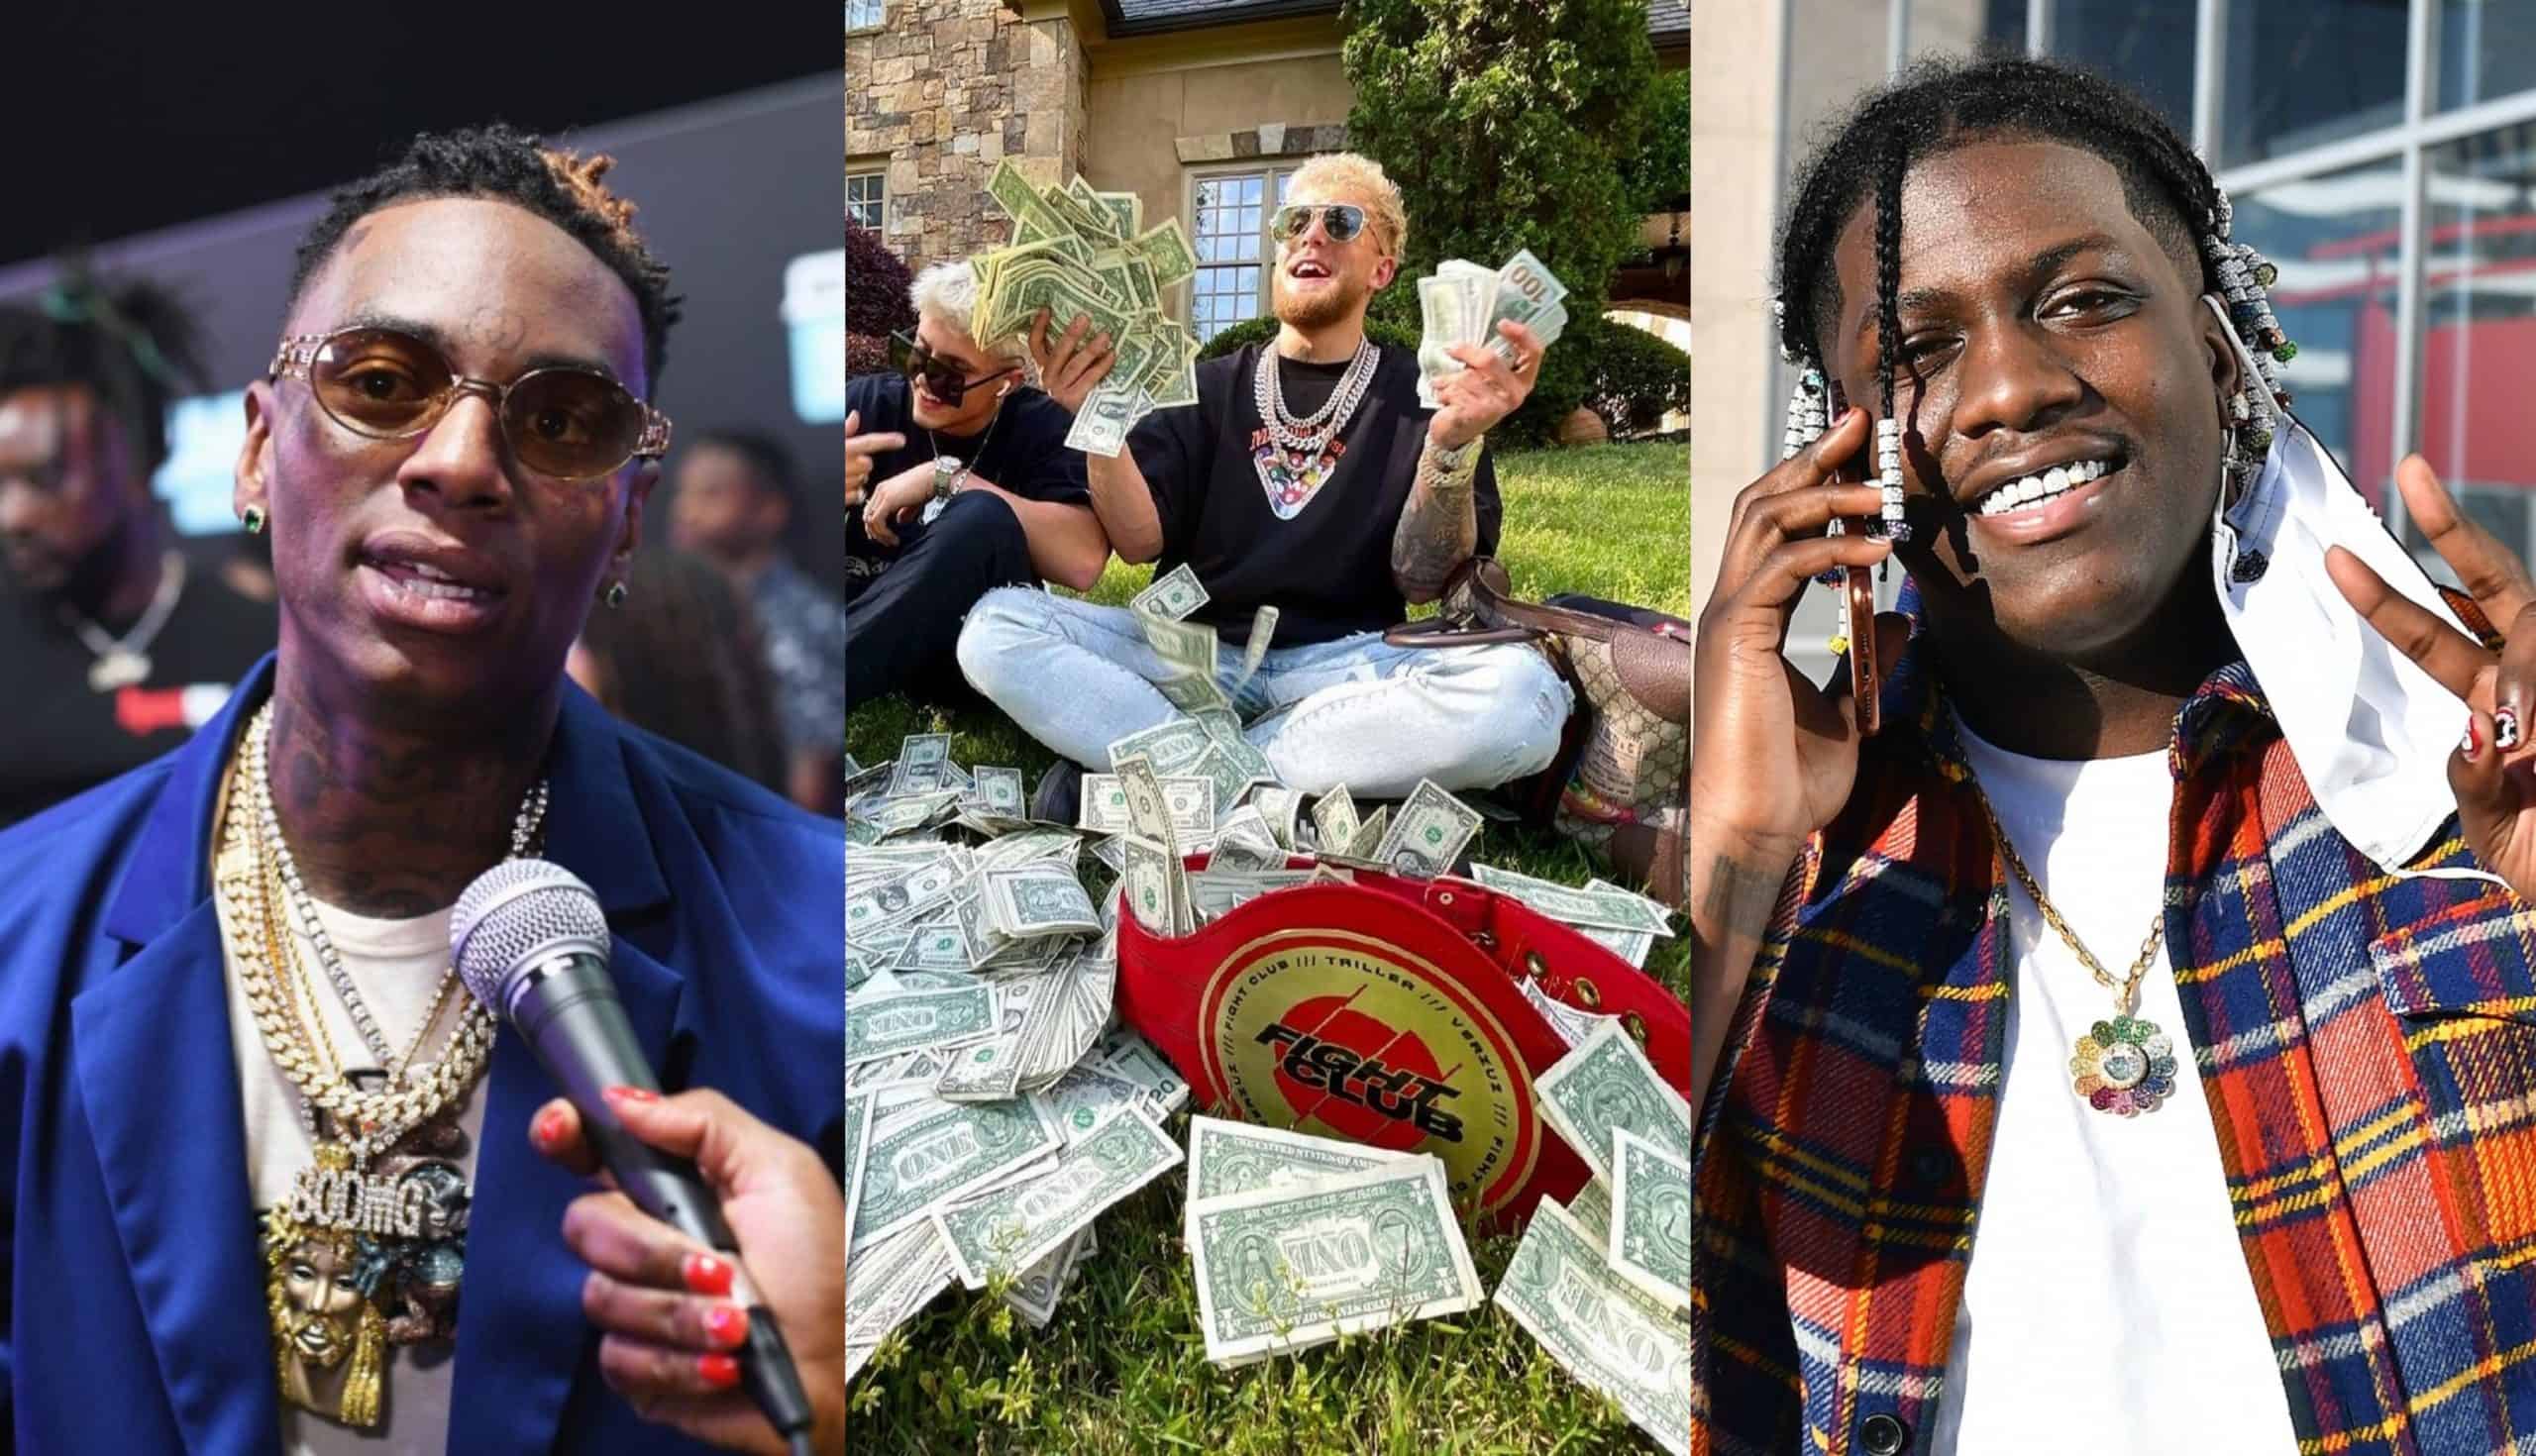 Alleged V1 SafeMoon scam puts Jake Paul, Soulja Boy, and Lil Yachty under the radar